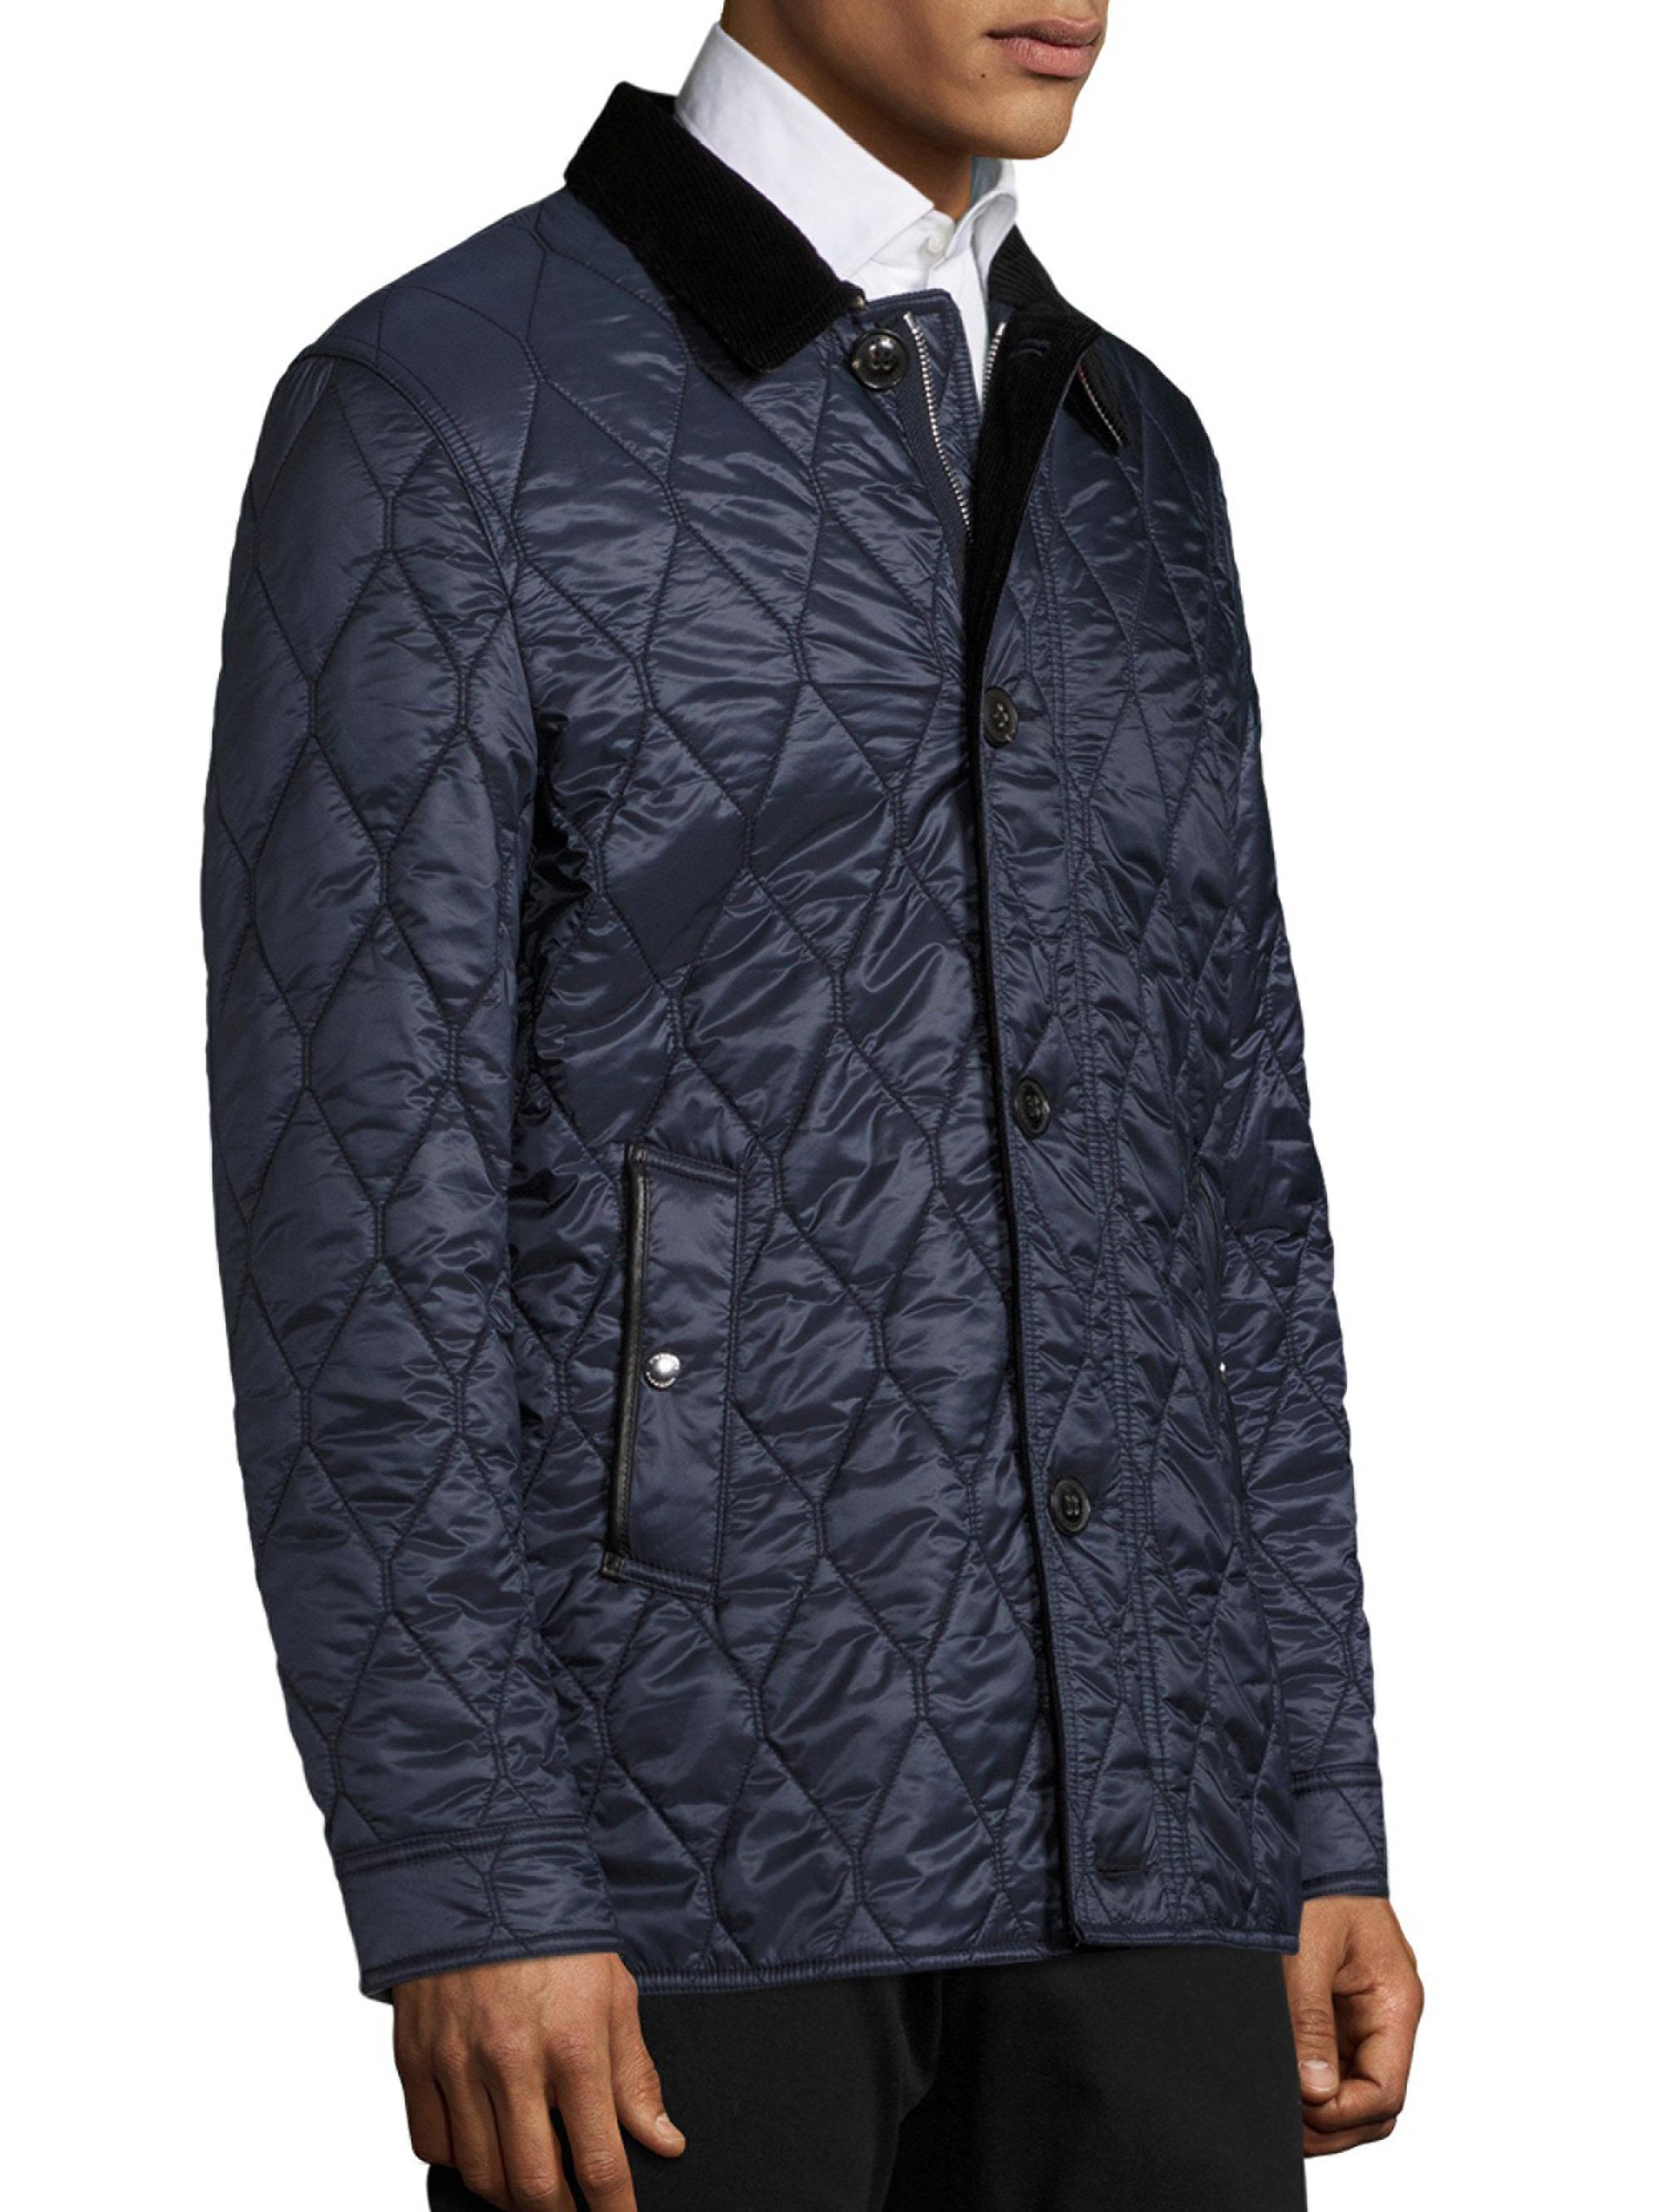 Lyst - Burberry Gransworth Quilted Jacket in Blue for Men